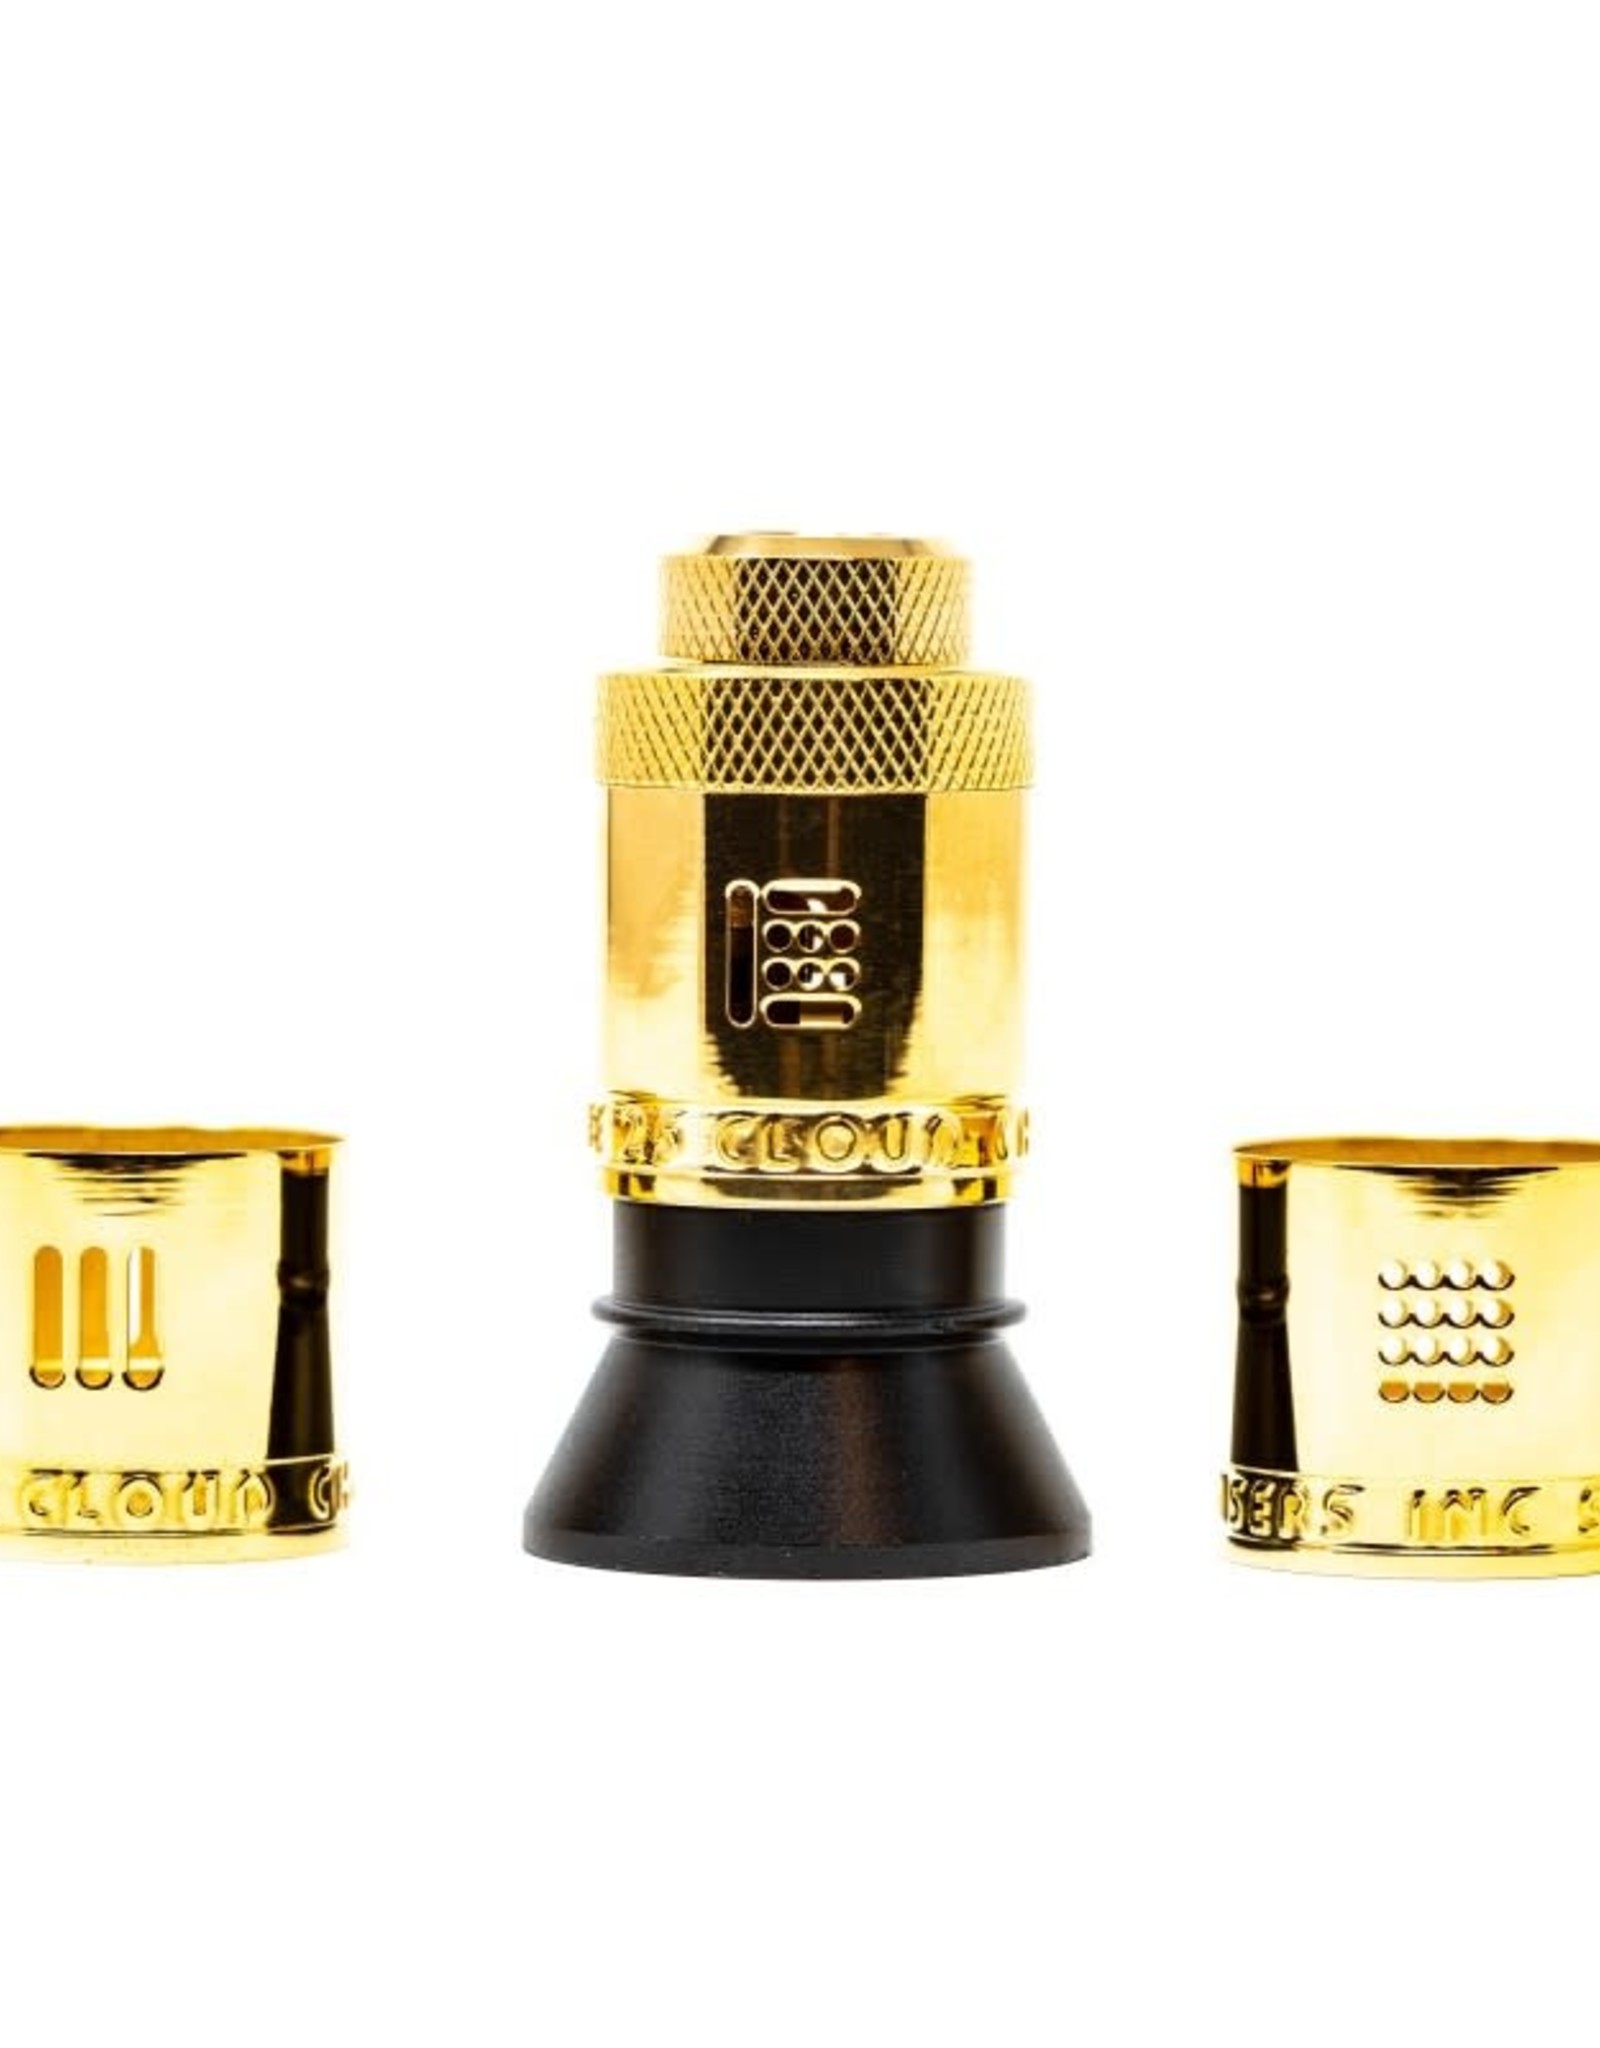 CLOUD CHASERS STRIFE 25MM RDA BY CLOUD CHASERS